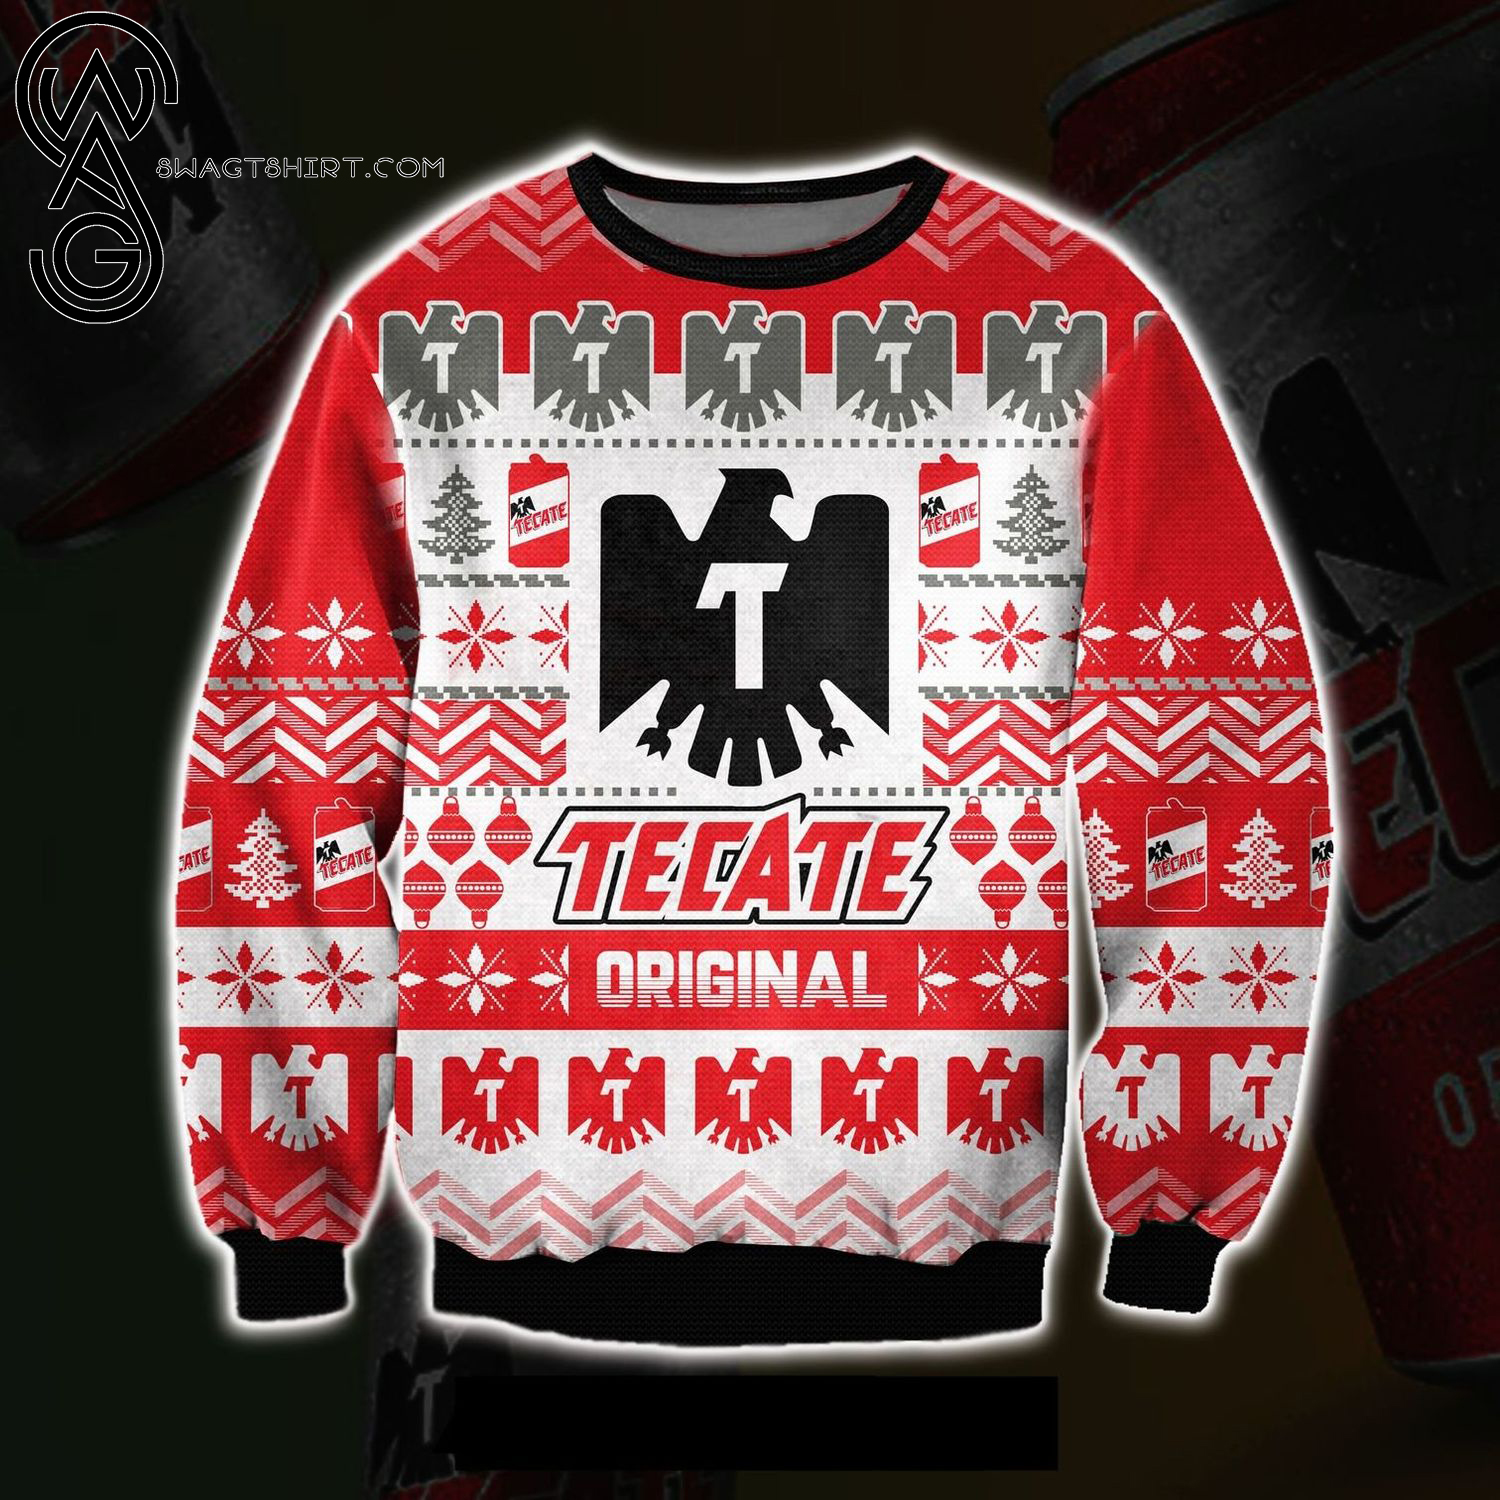 Tecate Original Mexican Lager Beer Ugly Christmas Sweater